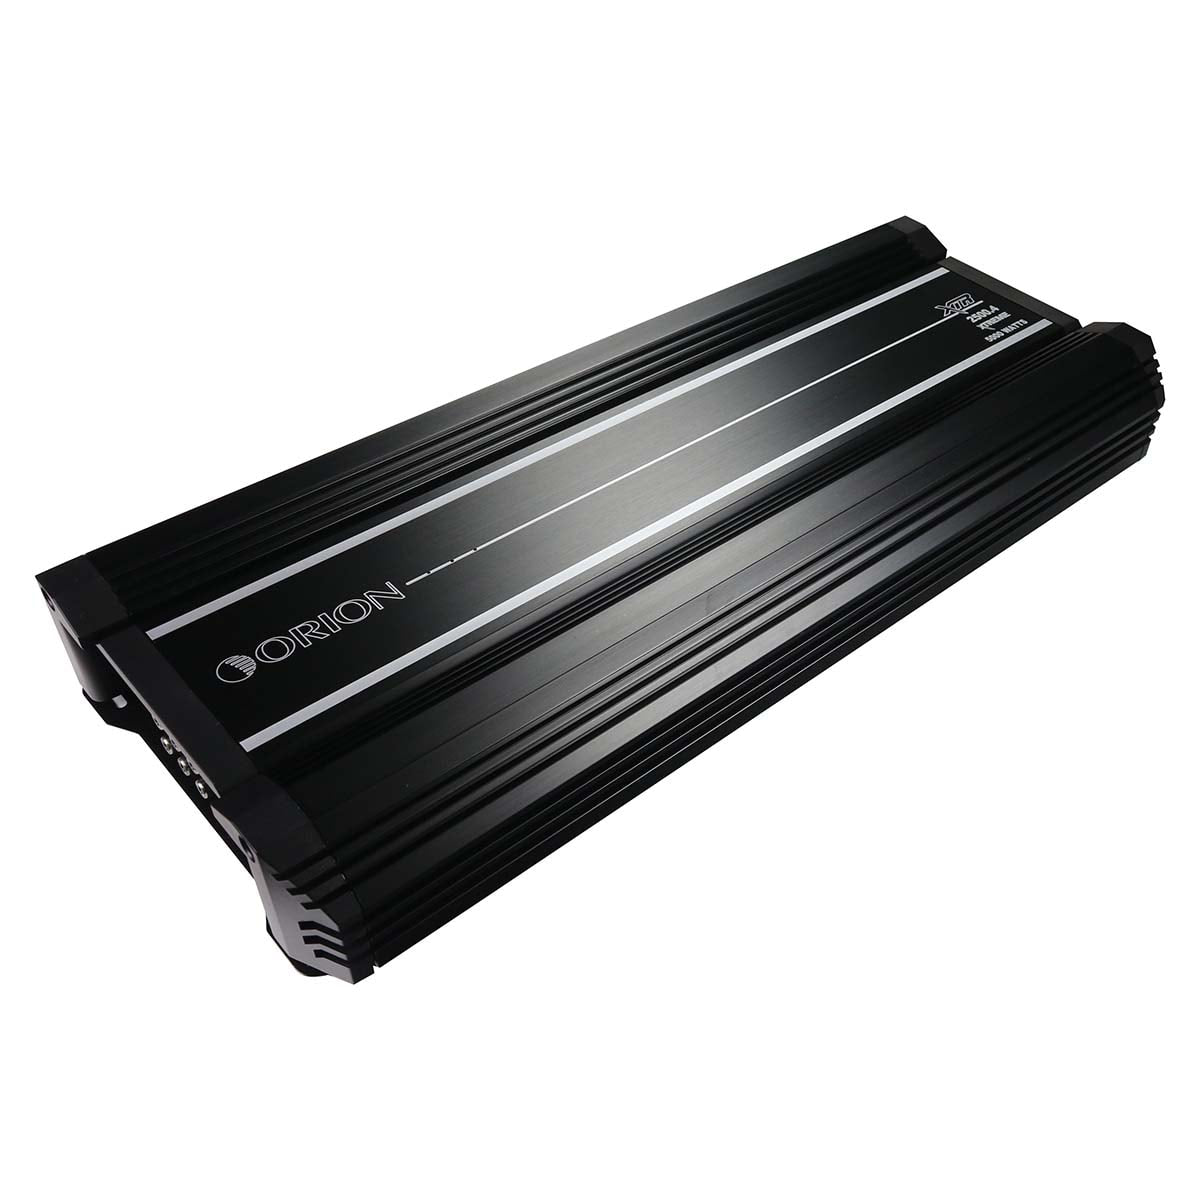 Orion 4 Channel Amplifier, 2500 RMS/10000W MAX